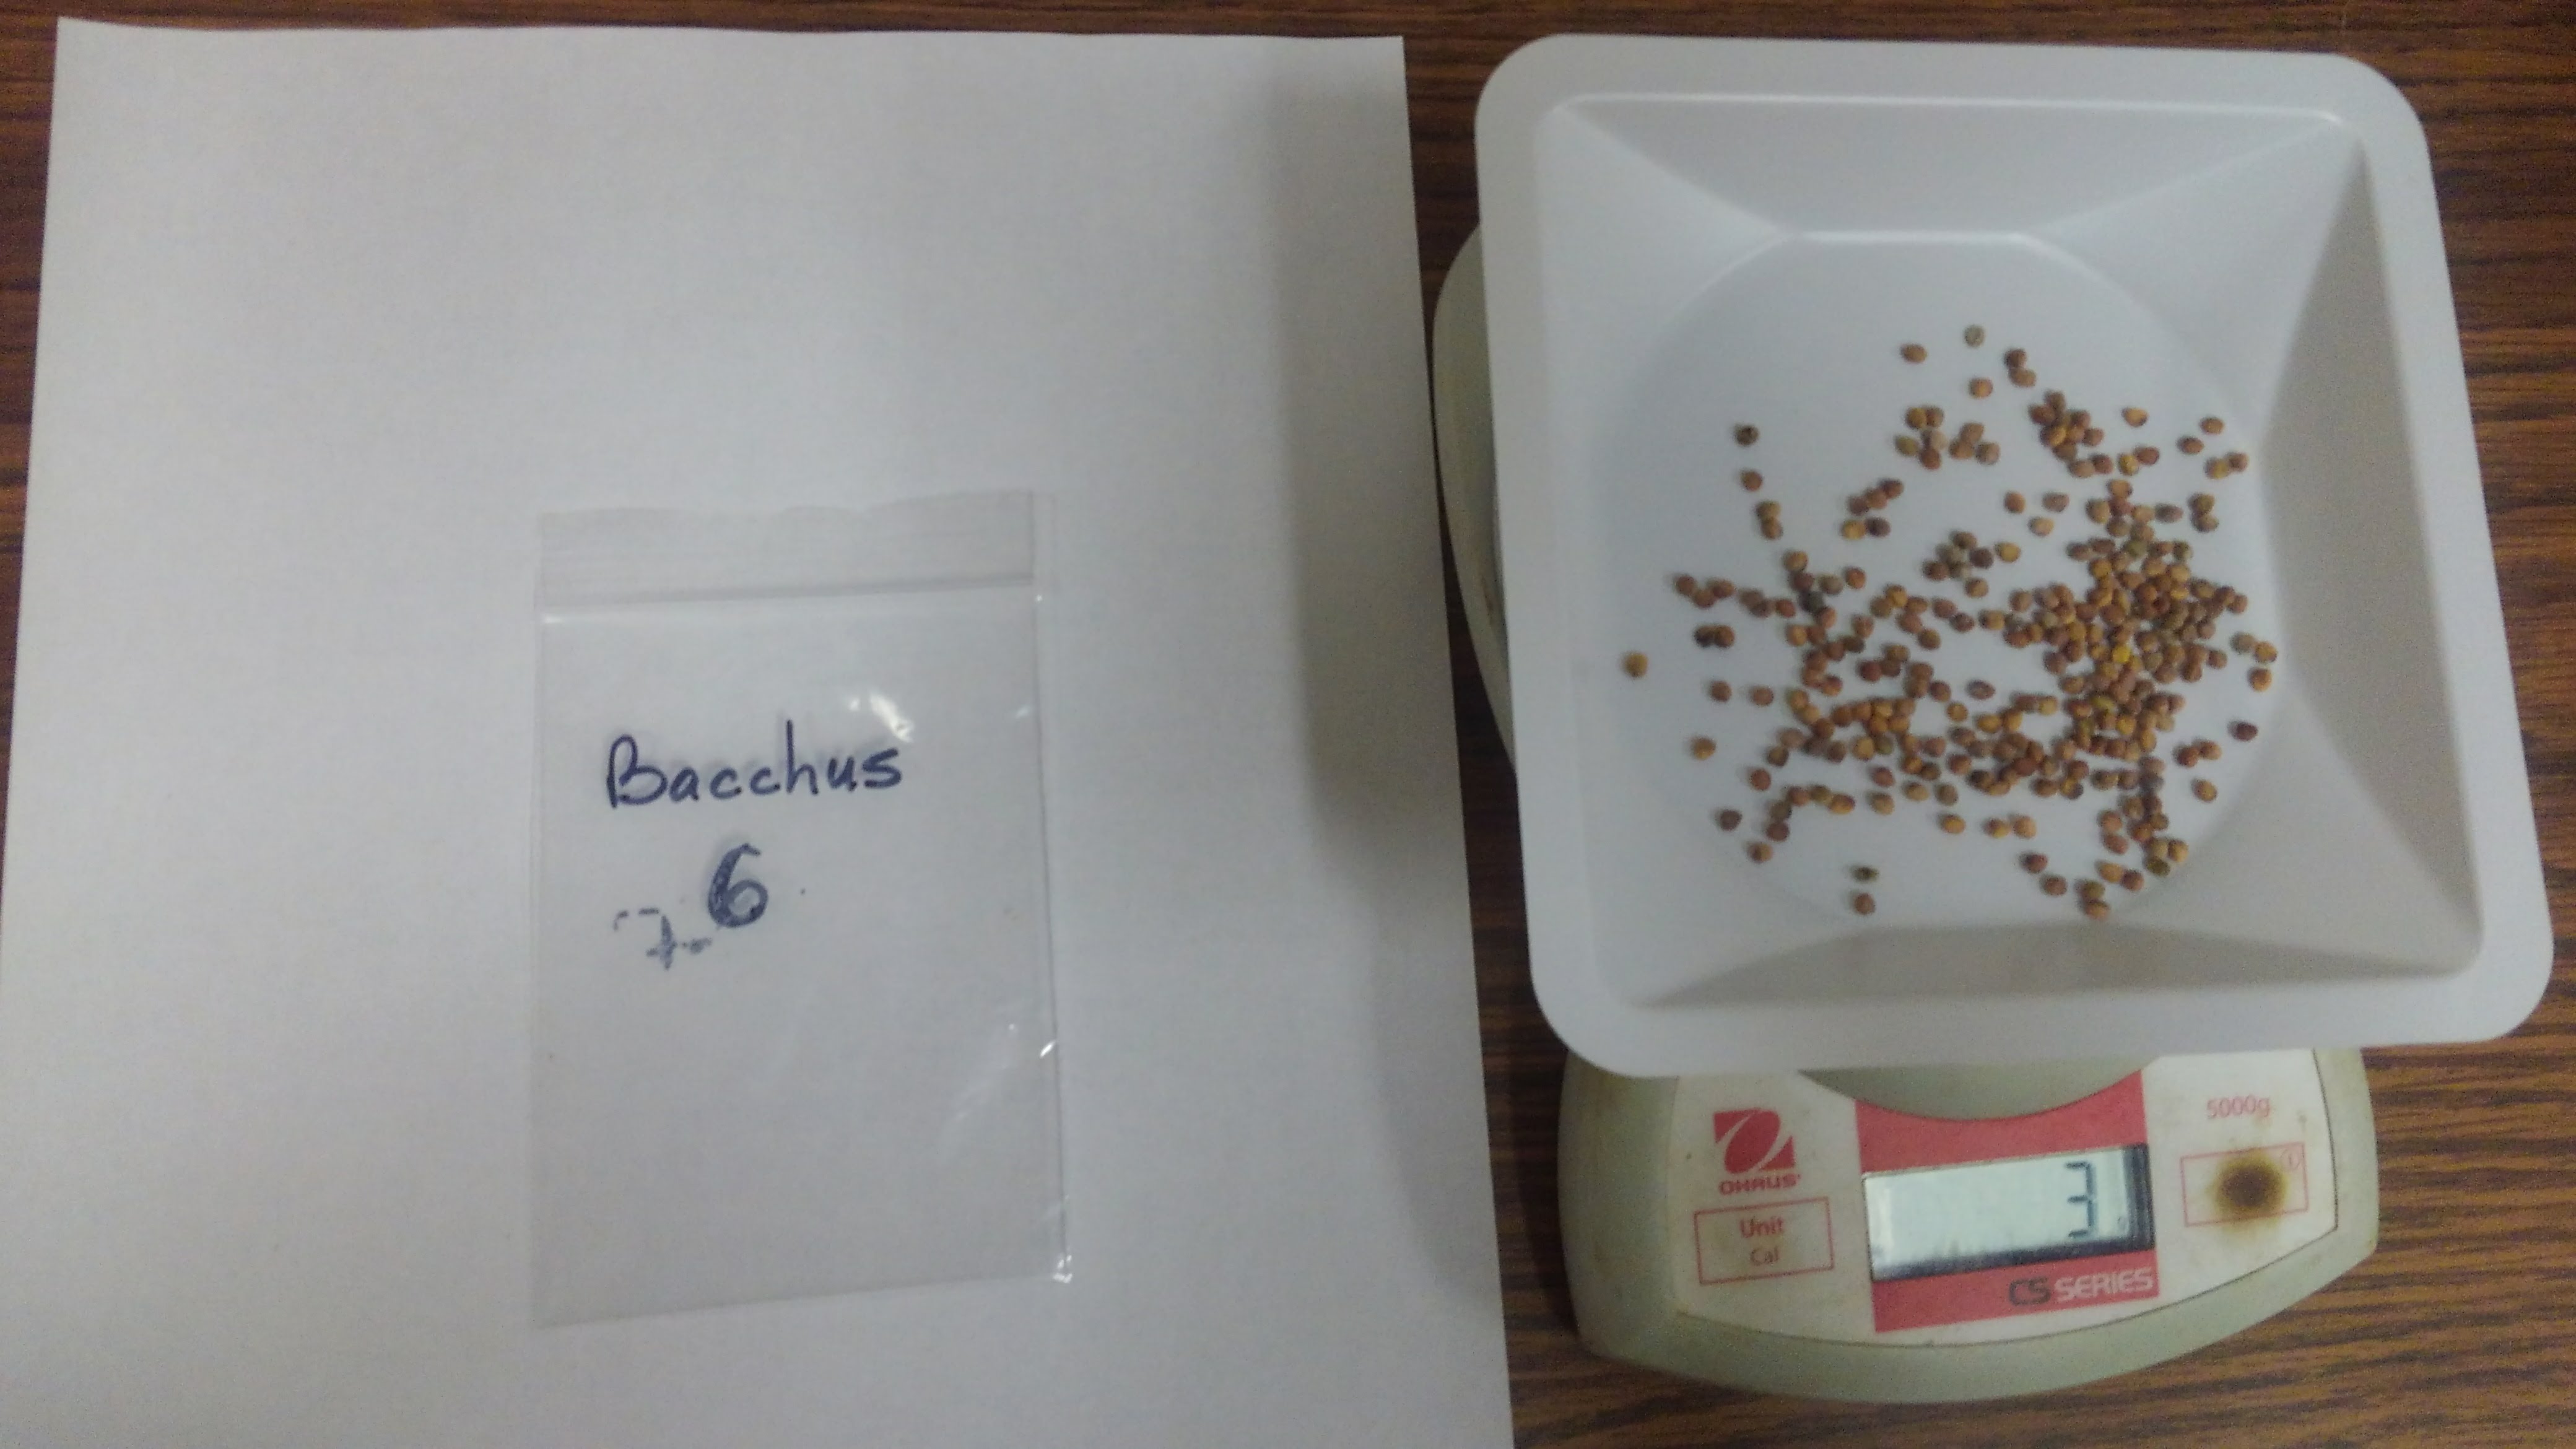 Weighing out seeds for the test plots image